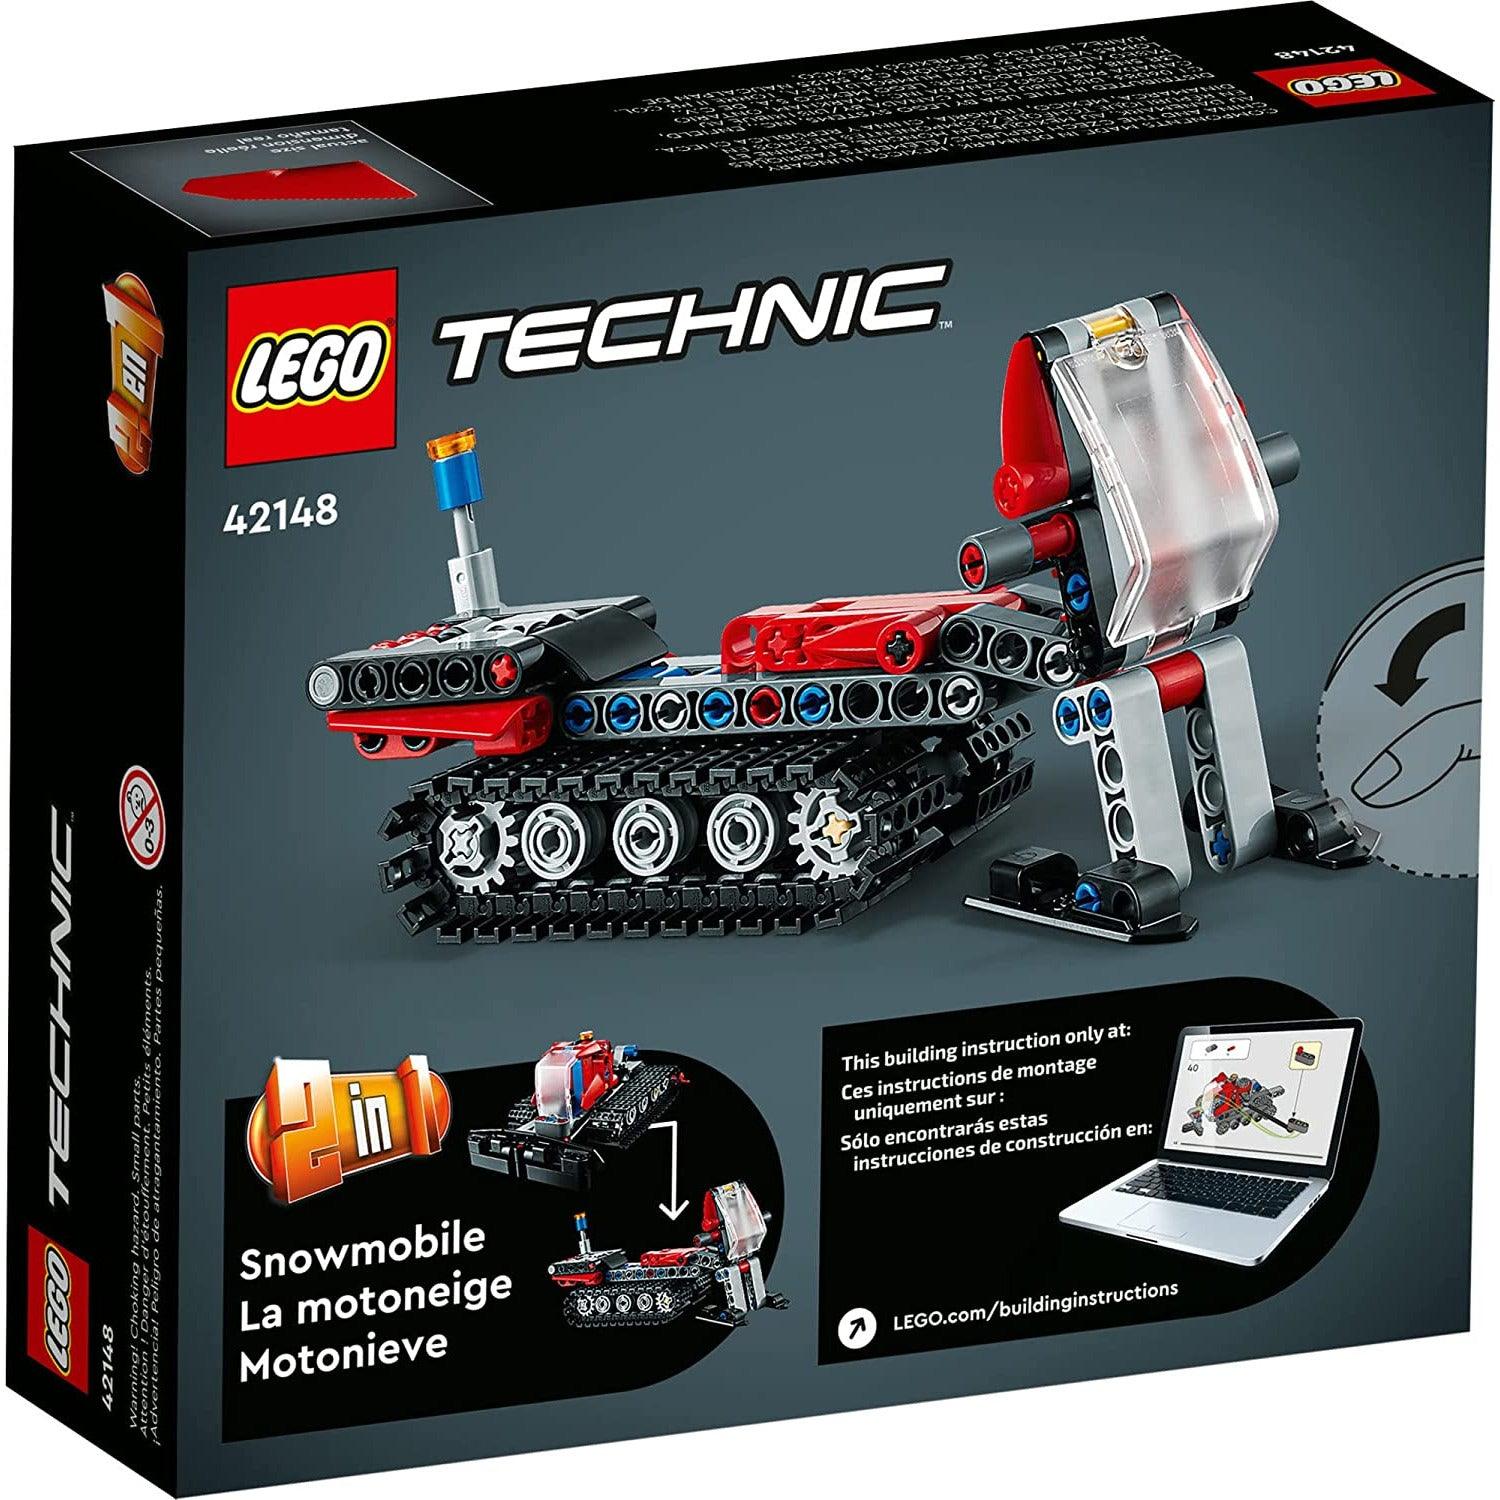 LEGO 42148 Technic Snow Groomer to Snowmobile, 2in1 Vehicle Model Set (178 Pieces)